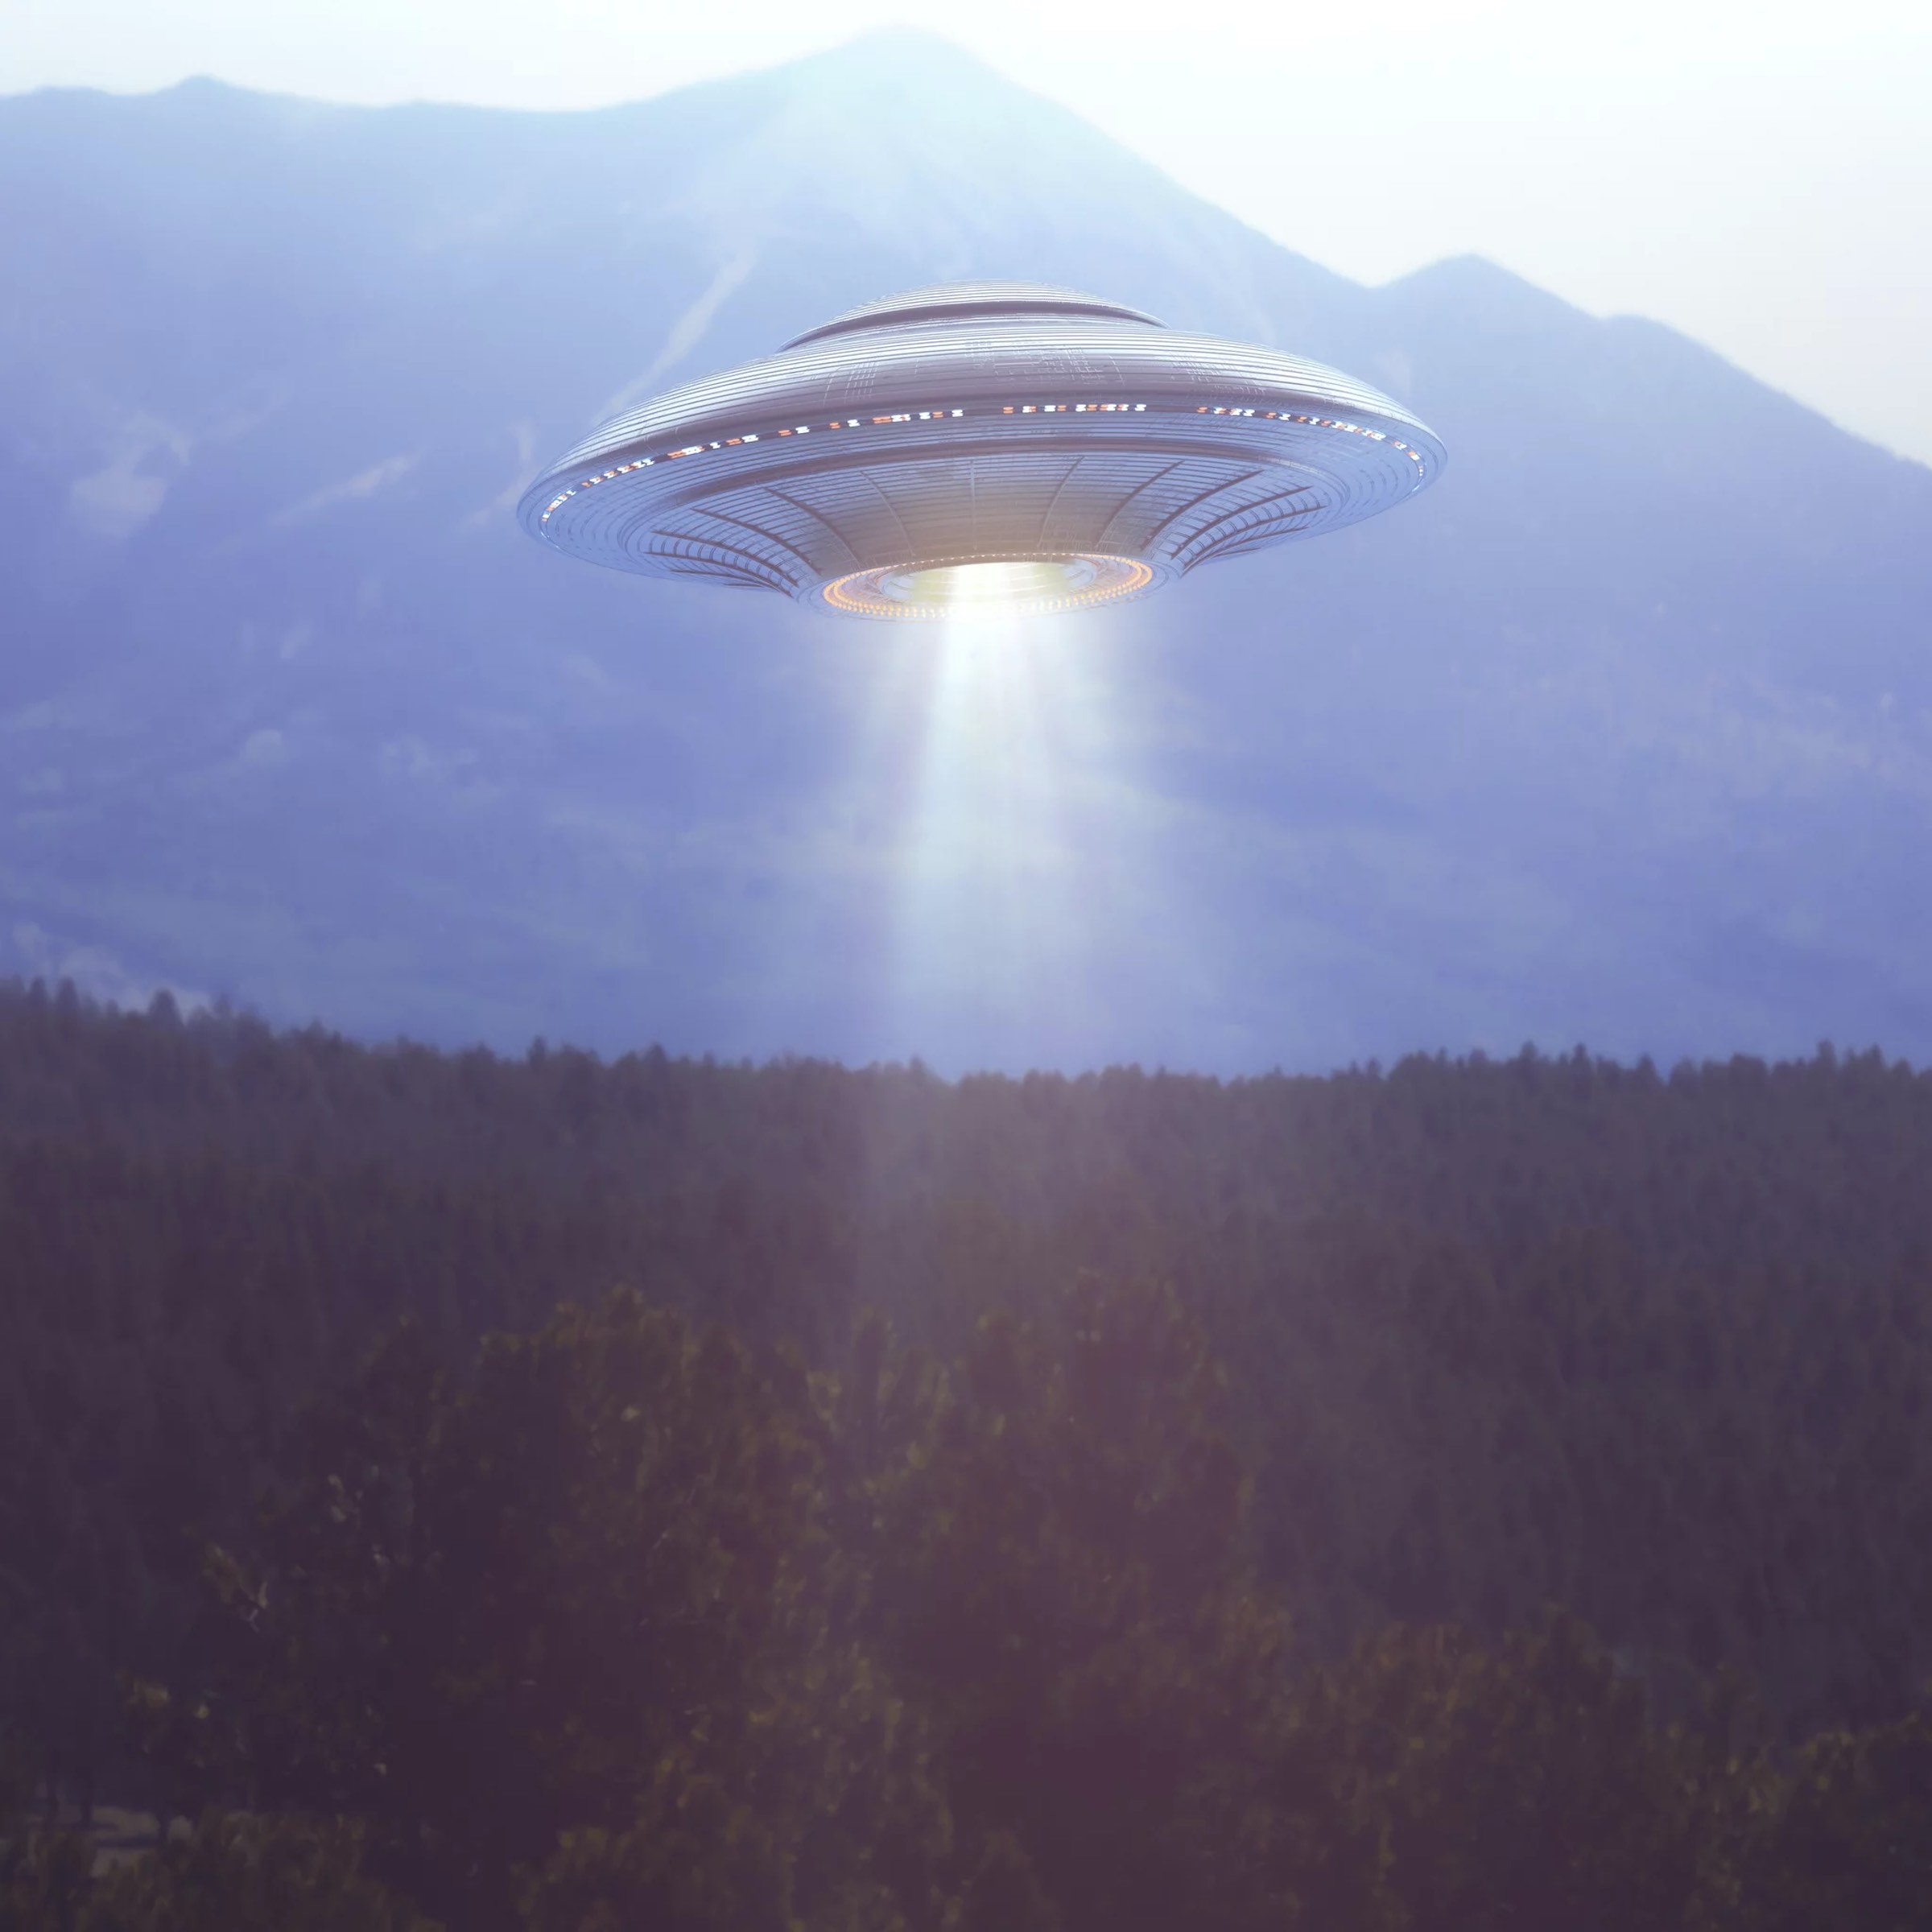 UFO photos made famous by 'The X-Files' surface, up for auction | Fox News